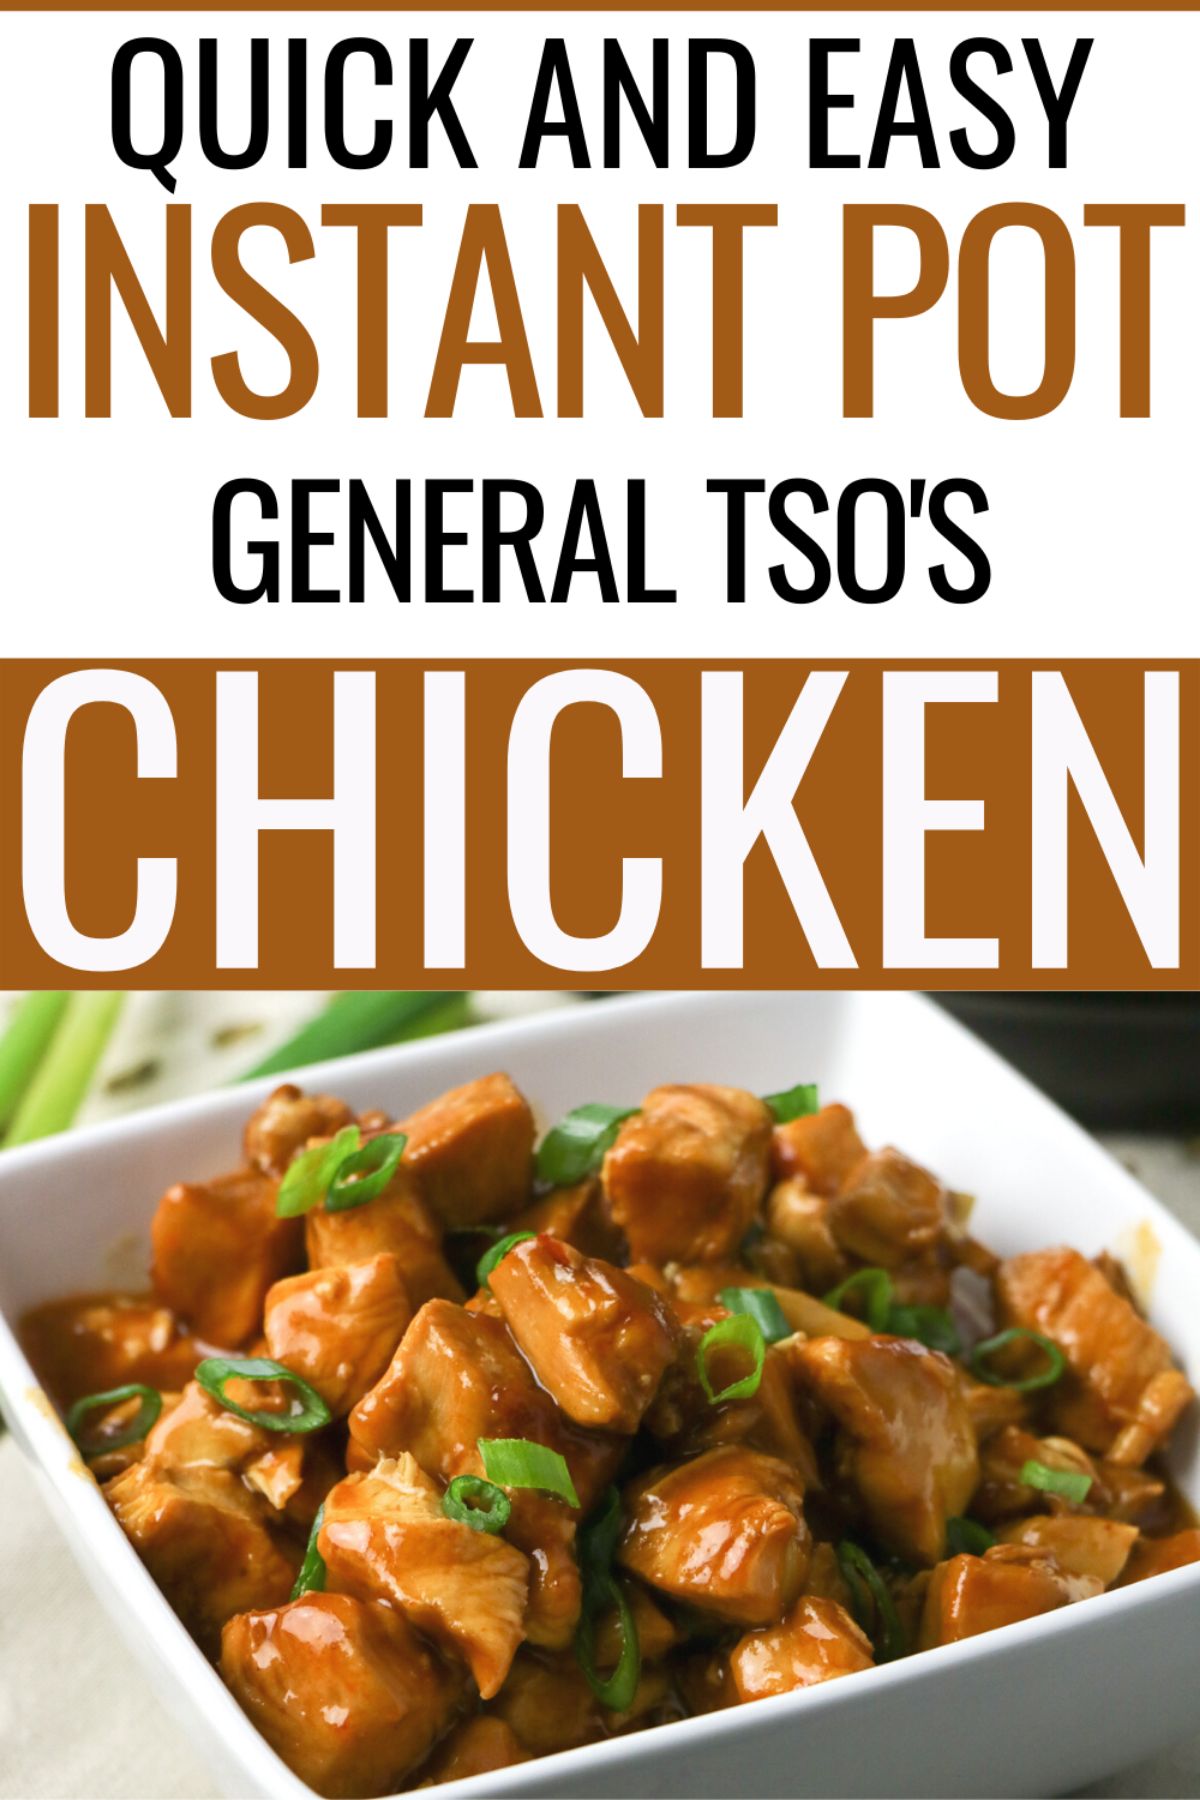 Instant Pot General Tso’s Chicken is perfect to whip up when you are craving Chinese takeout! It’s so easy and ready in less than 30 minutes. #instantpot #pressurecooker #generaltsoschicken #chinesefood #chicken via @wondermomwannab